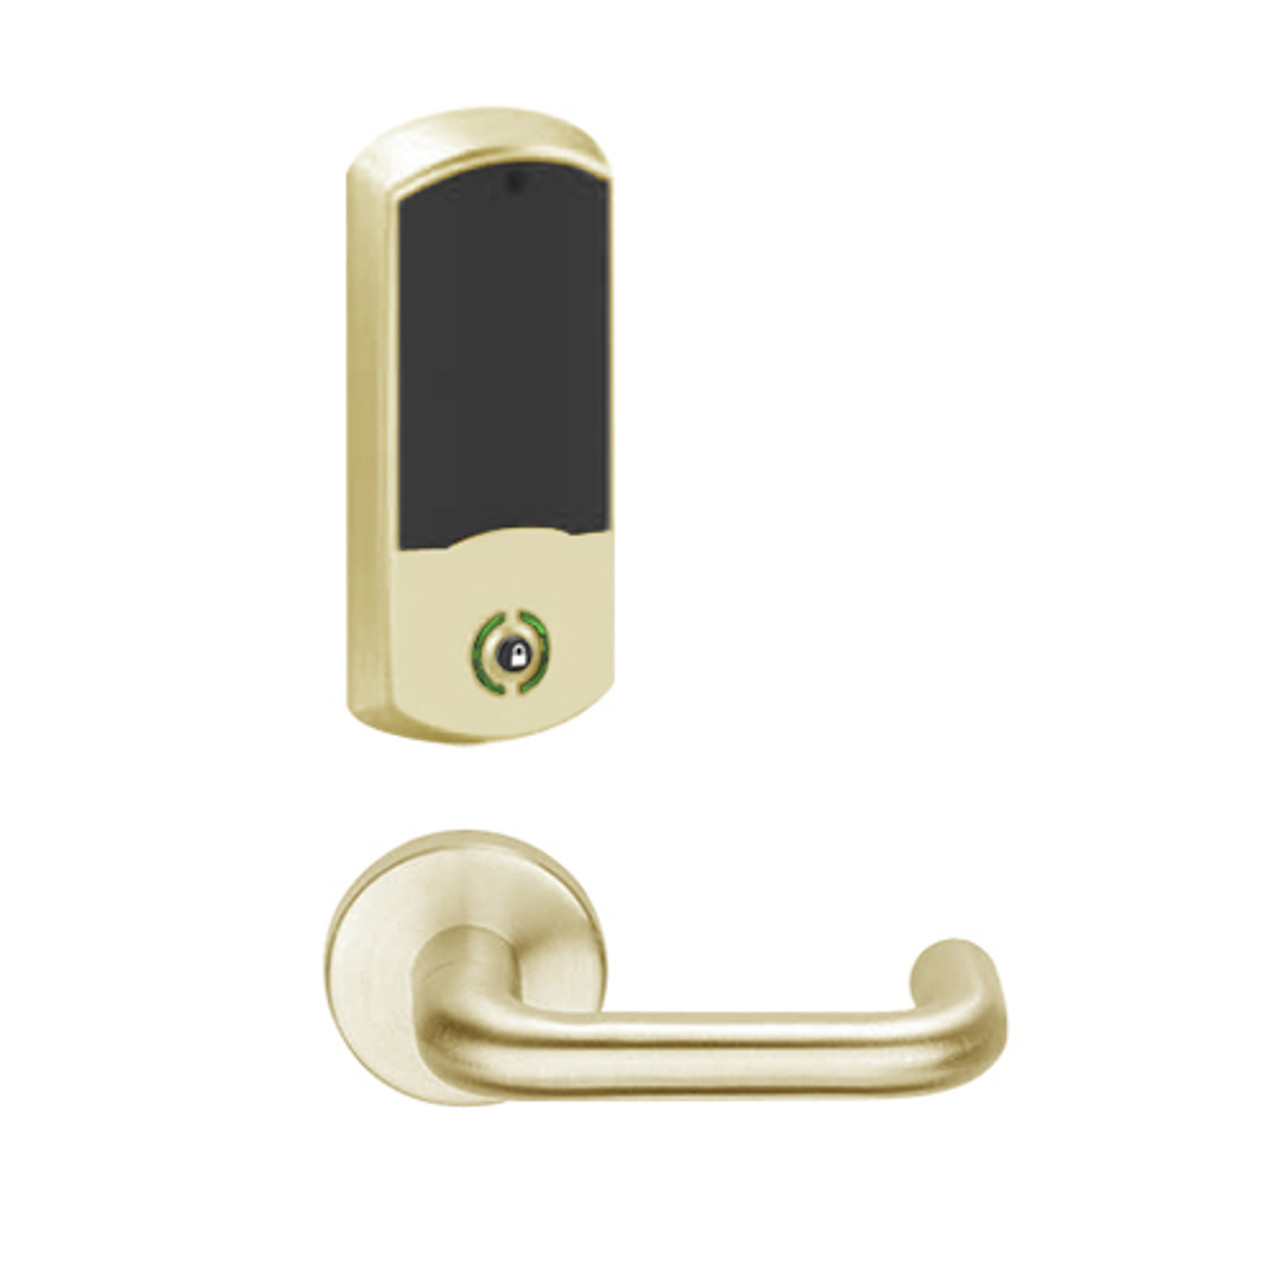 LEMB-GRW-P-03-606-00C Schlage Privacy/Office Wireless Greenwich Mortise Lock with Push Button & LED Indicator and Tubular Lever in Satin Brass